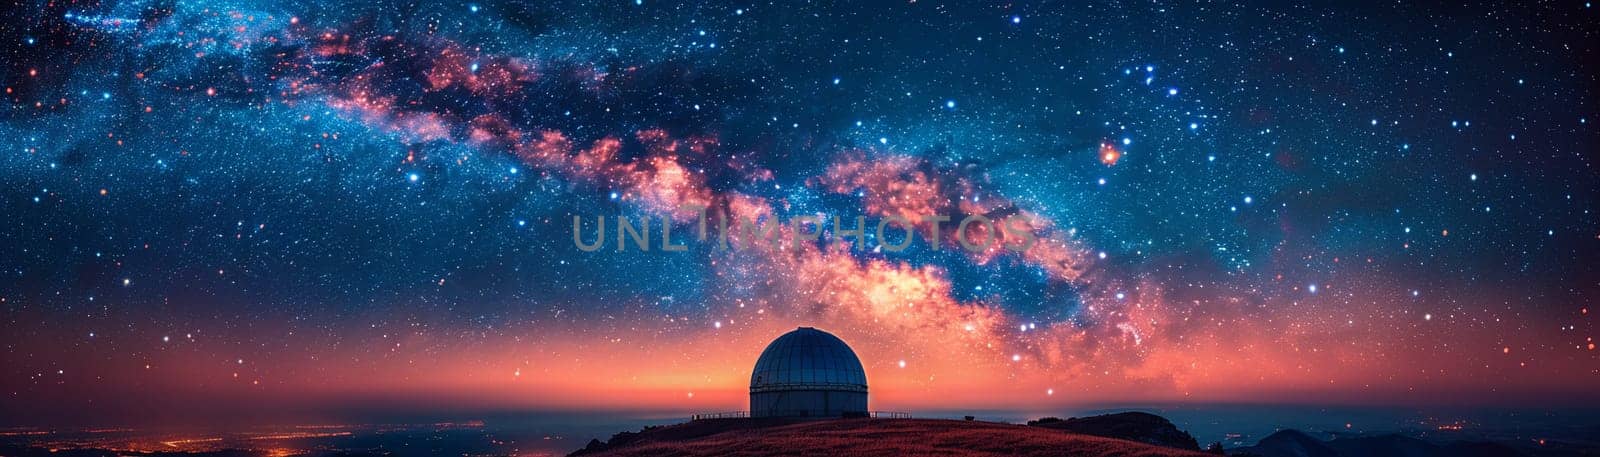 Observatory Sky Dome Unlocks Galactic Mysteries in Business of Astronomical Research, Night sky charts and observation decks unlock a story of galactic mysteries and astronomical research in the observatory sky dome business.